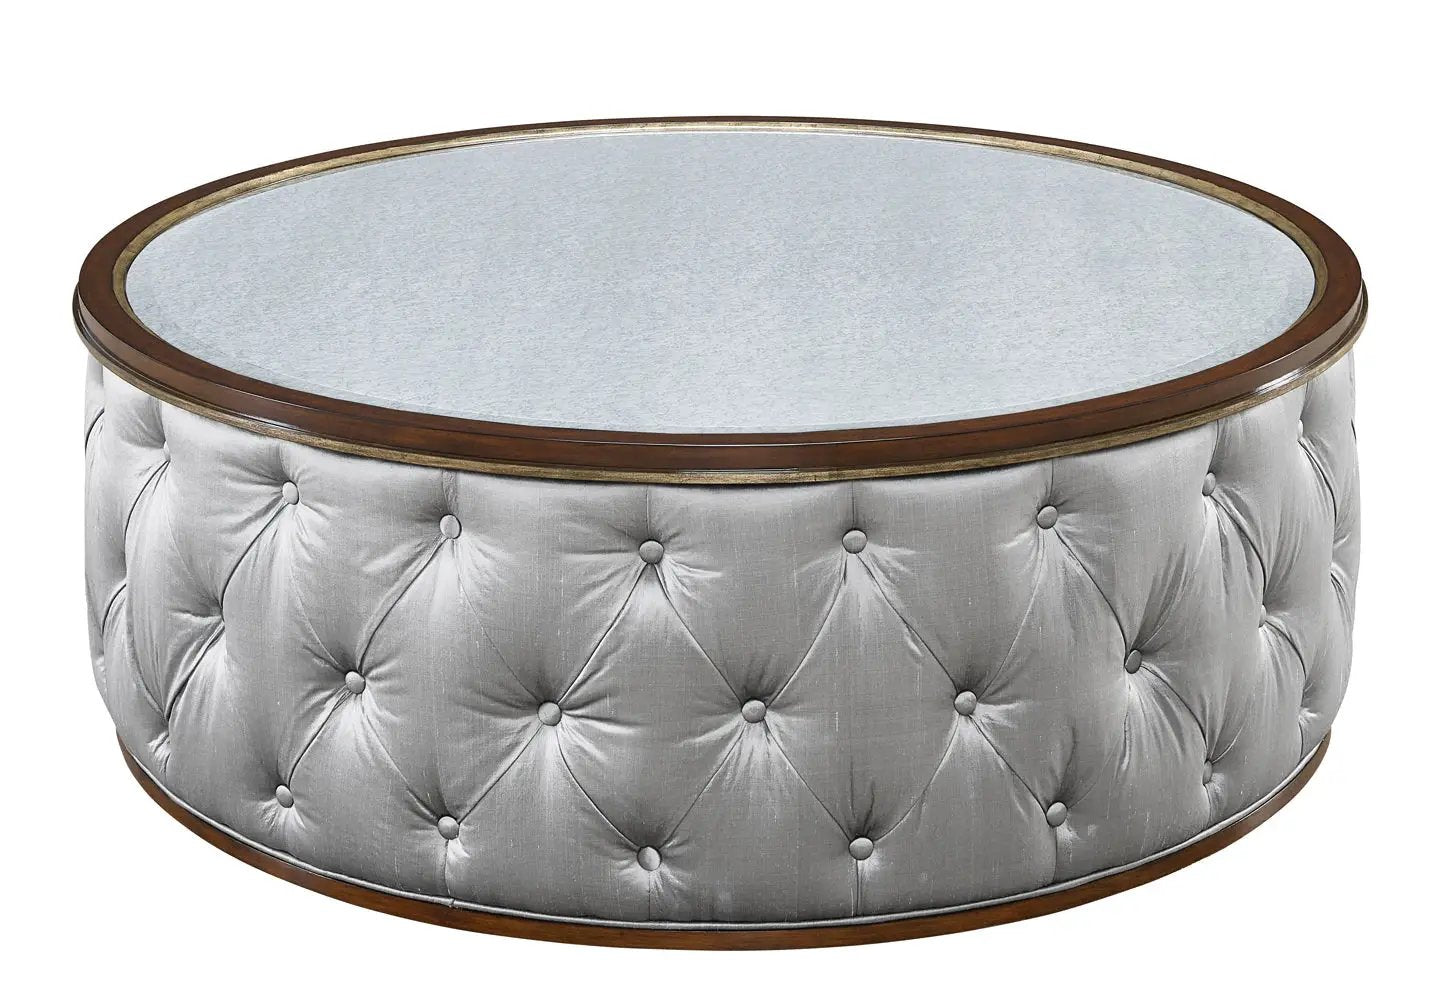 Cascade Round Cocktail Table